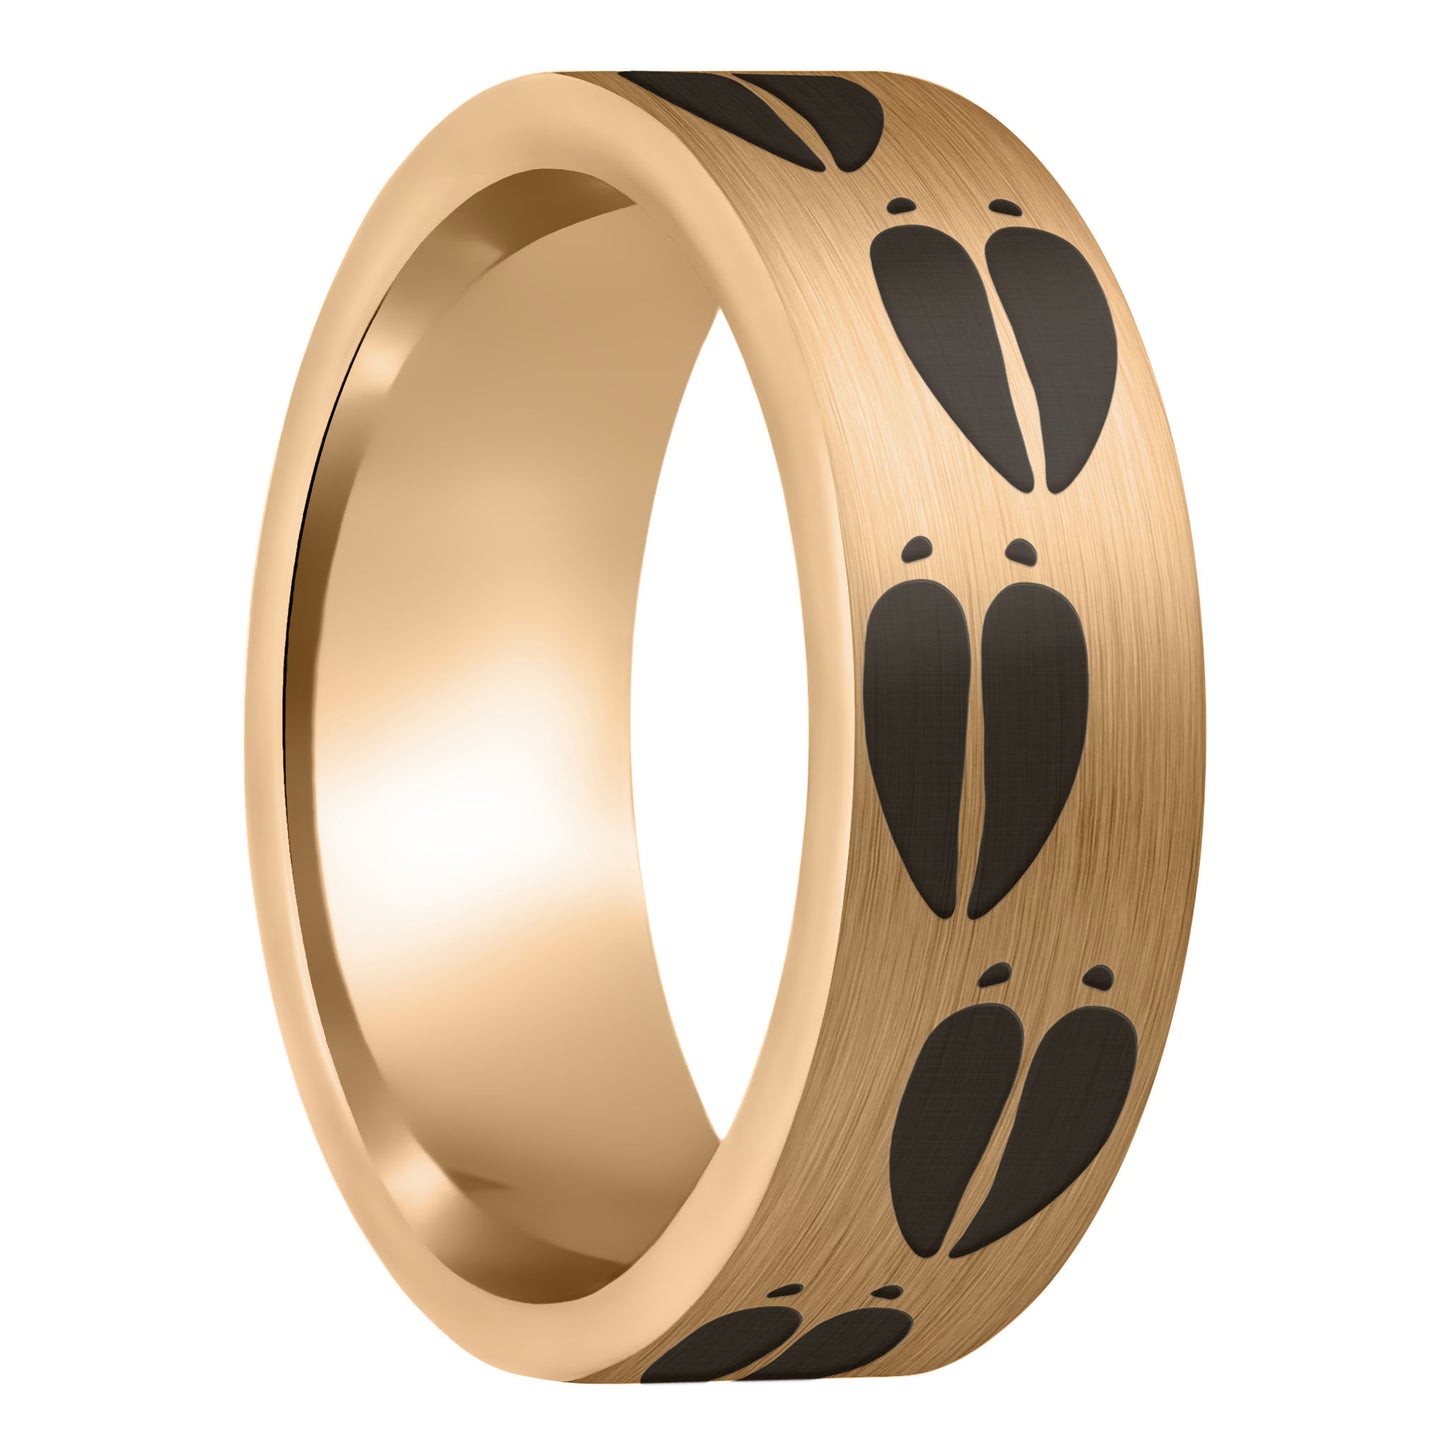 A moose tracks brushed rose gold tungsten men's wedding band displayed on a plain white background.